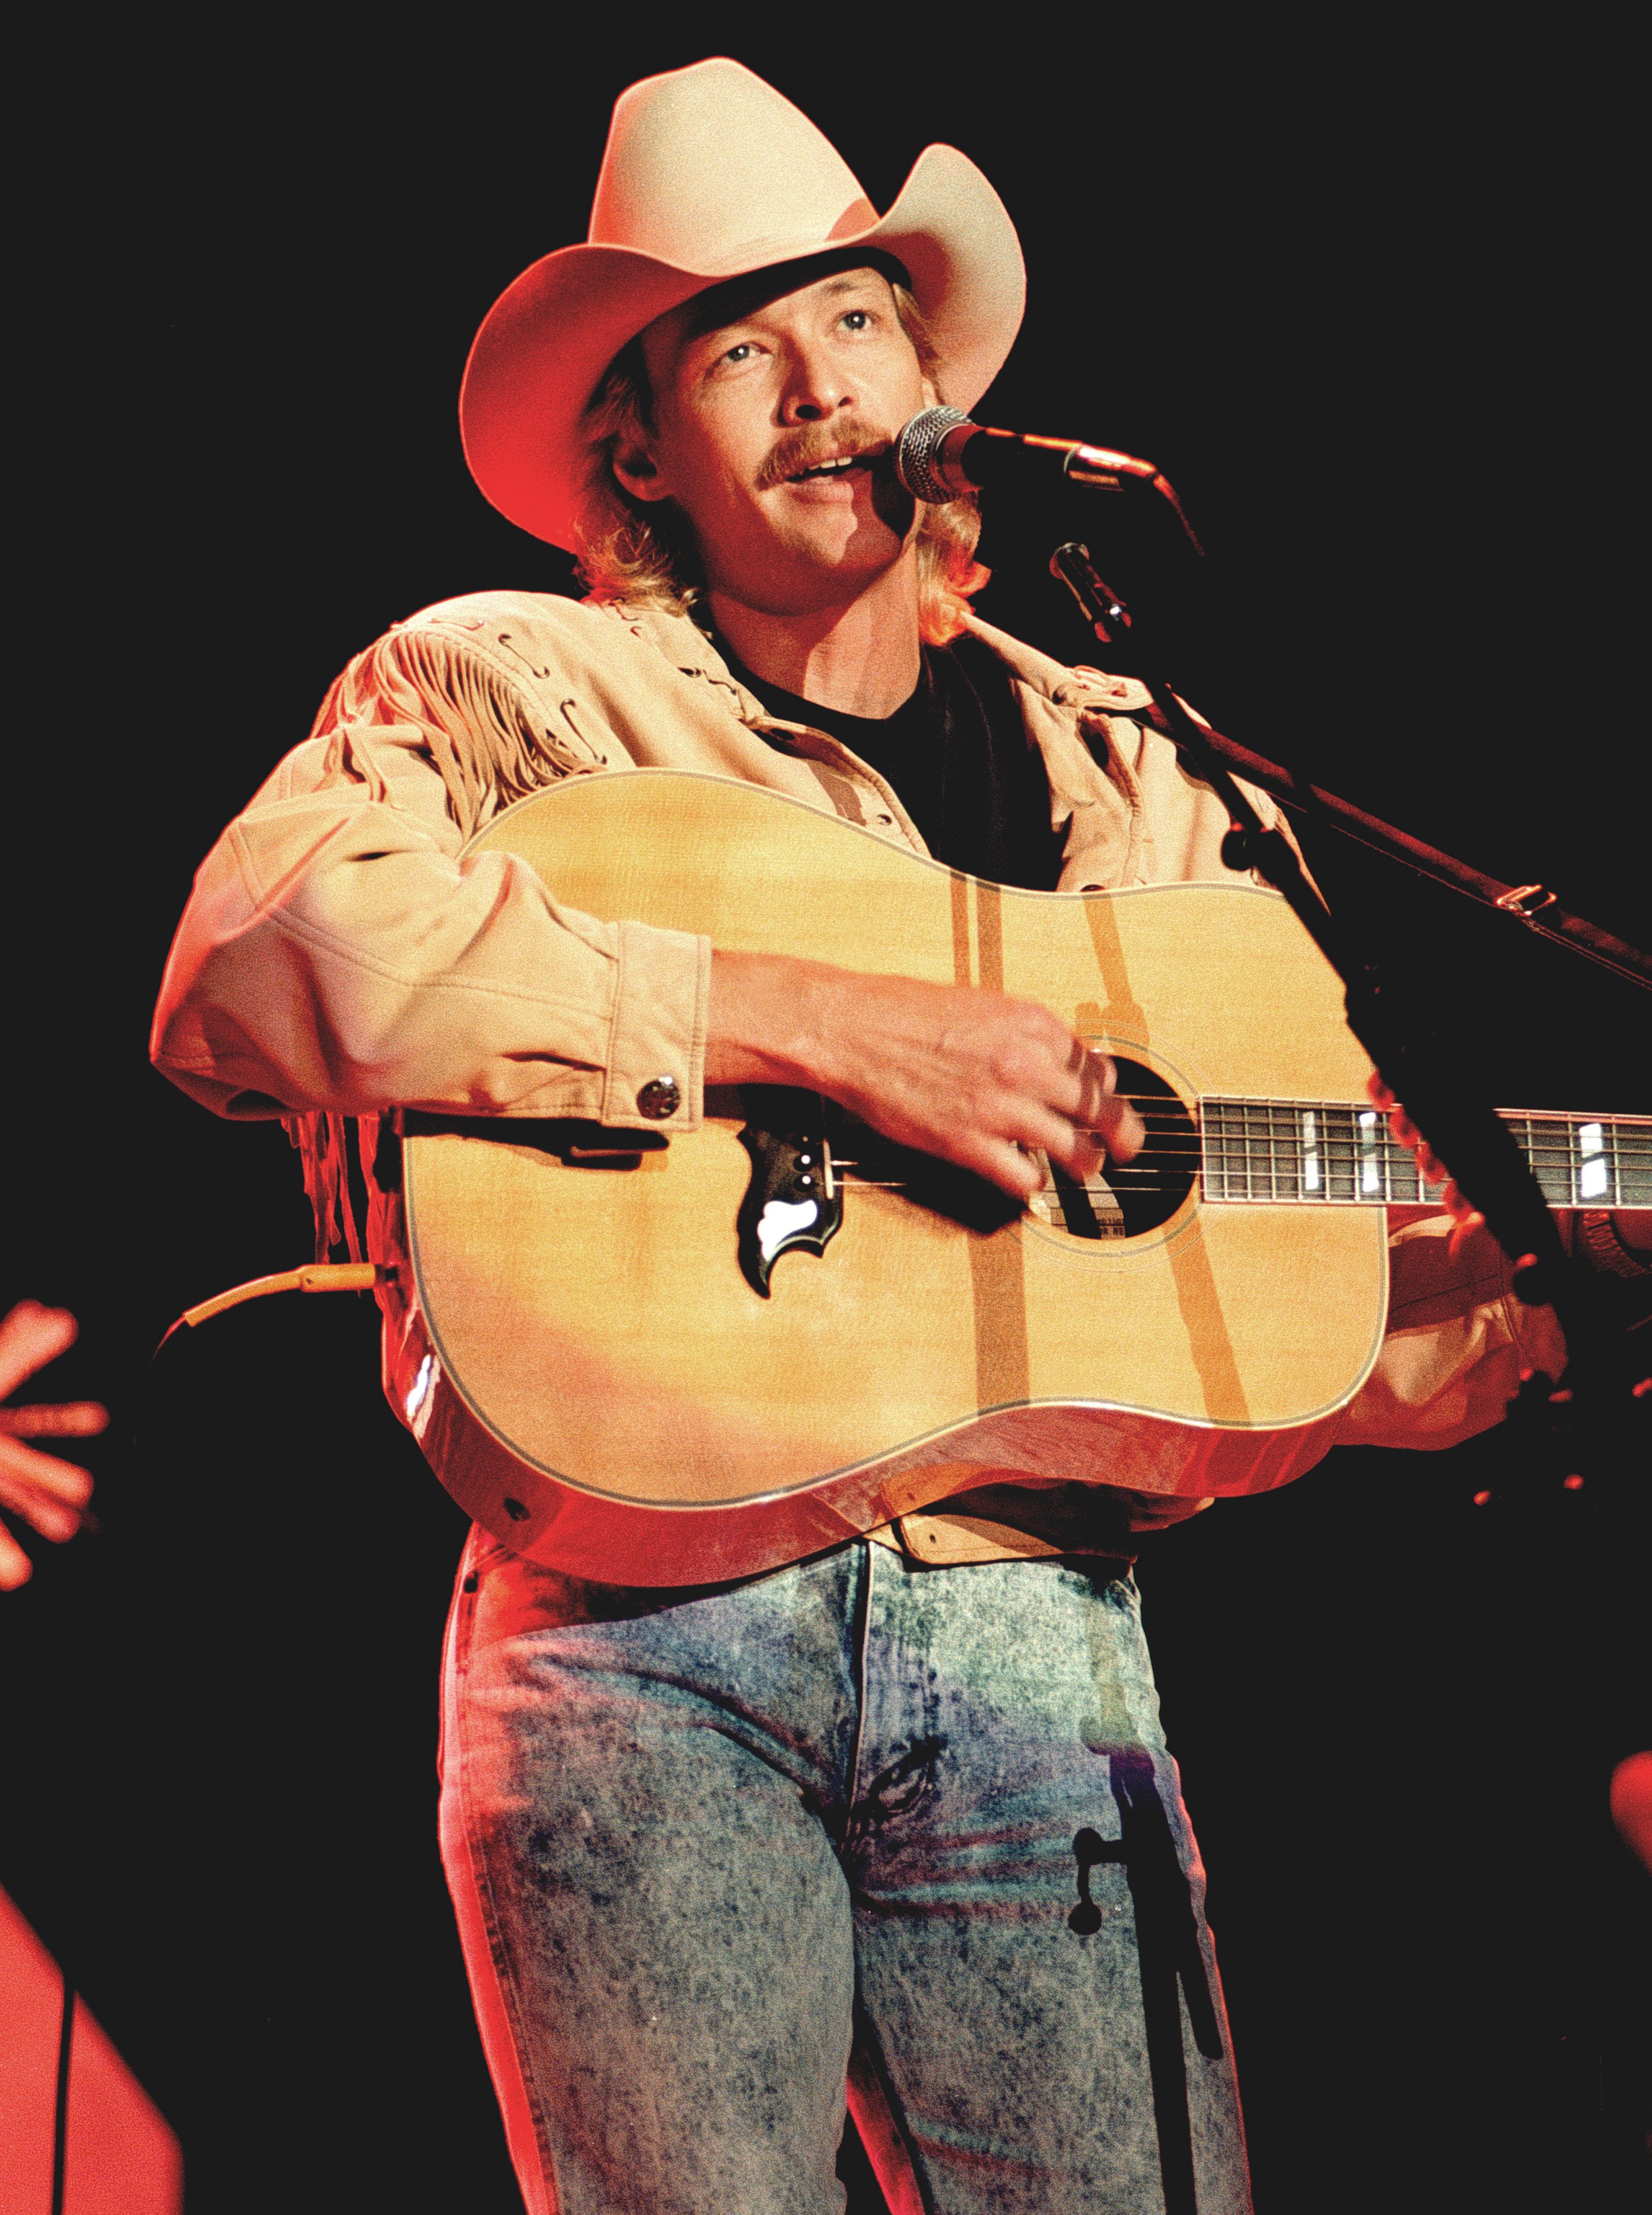 Alan Jackson performs at Shoreline Amphitheater in Mountain View California on September 21, 1991. | Source: Getty Images